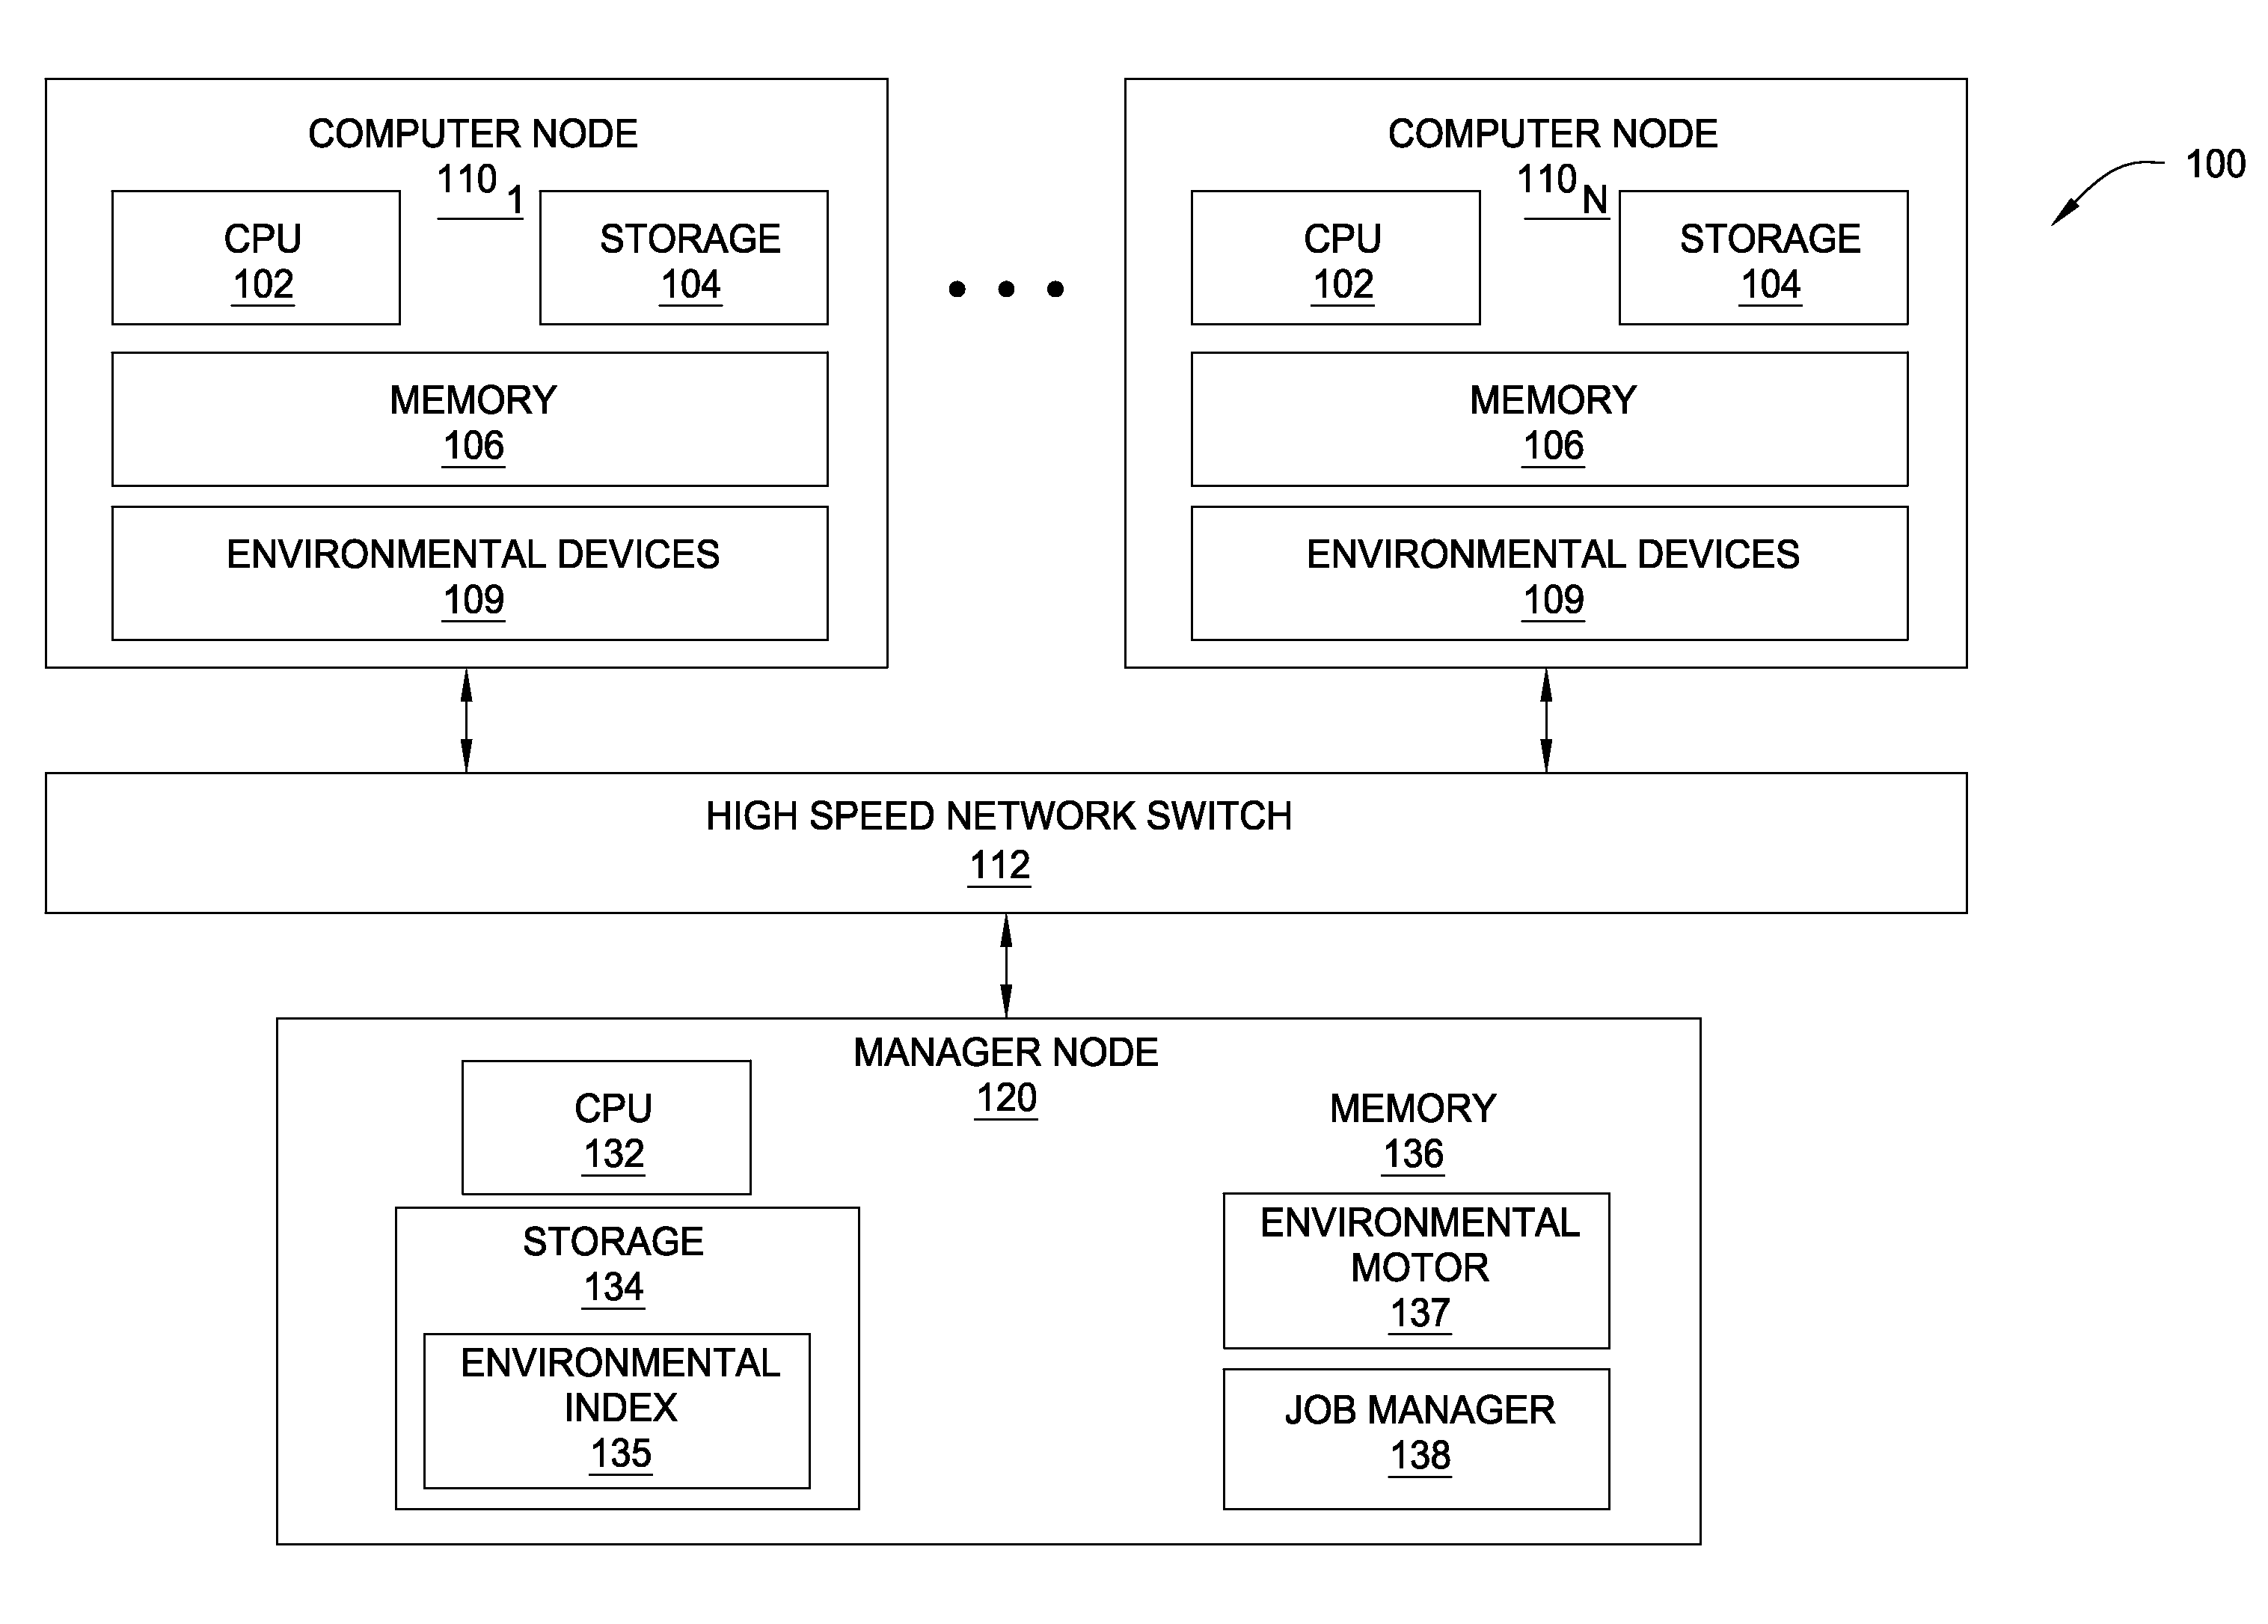 Scheduling jobs of a multi-node computer system based on environmental impact